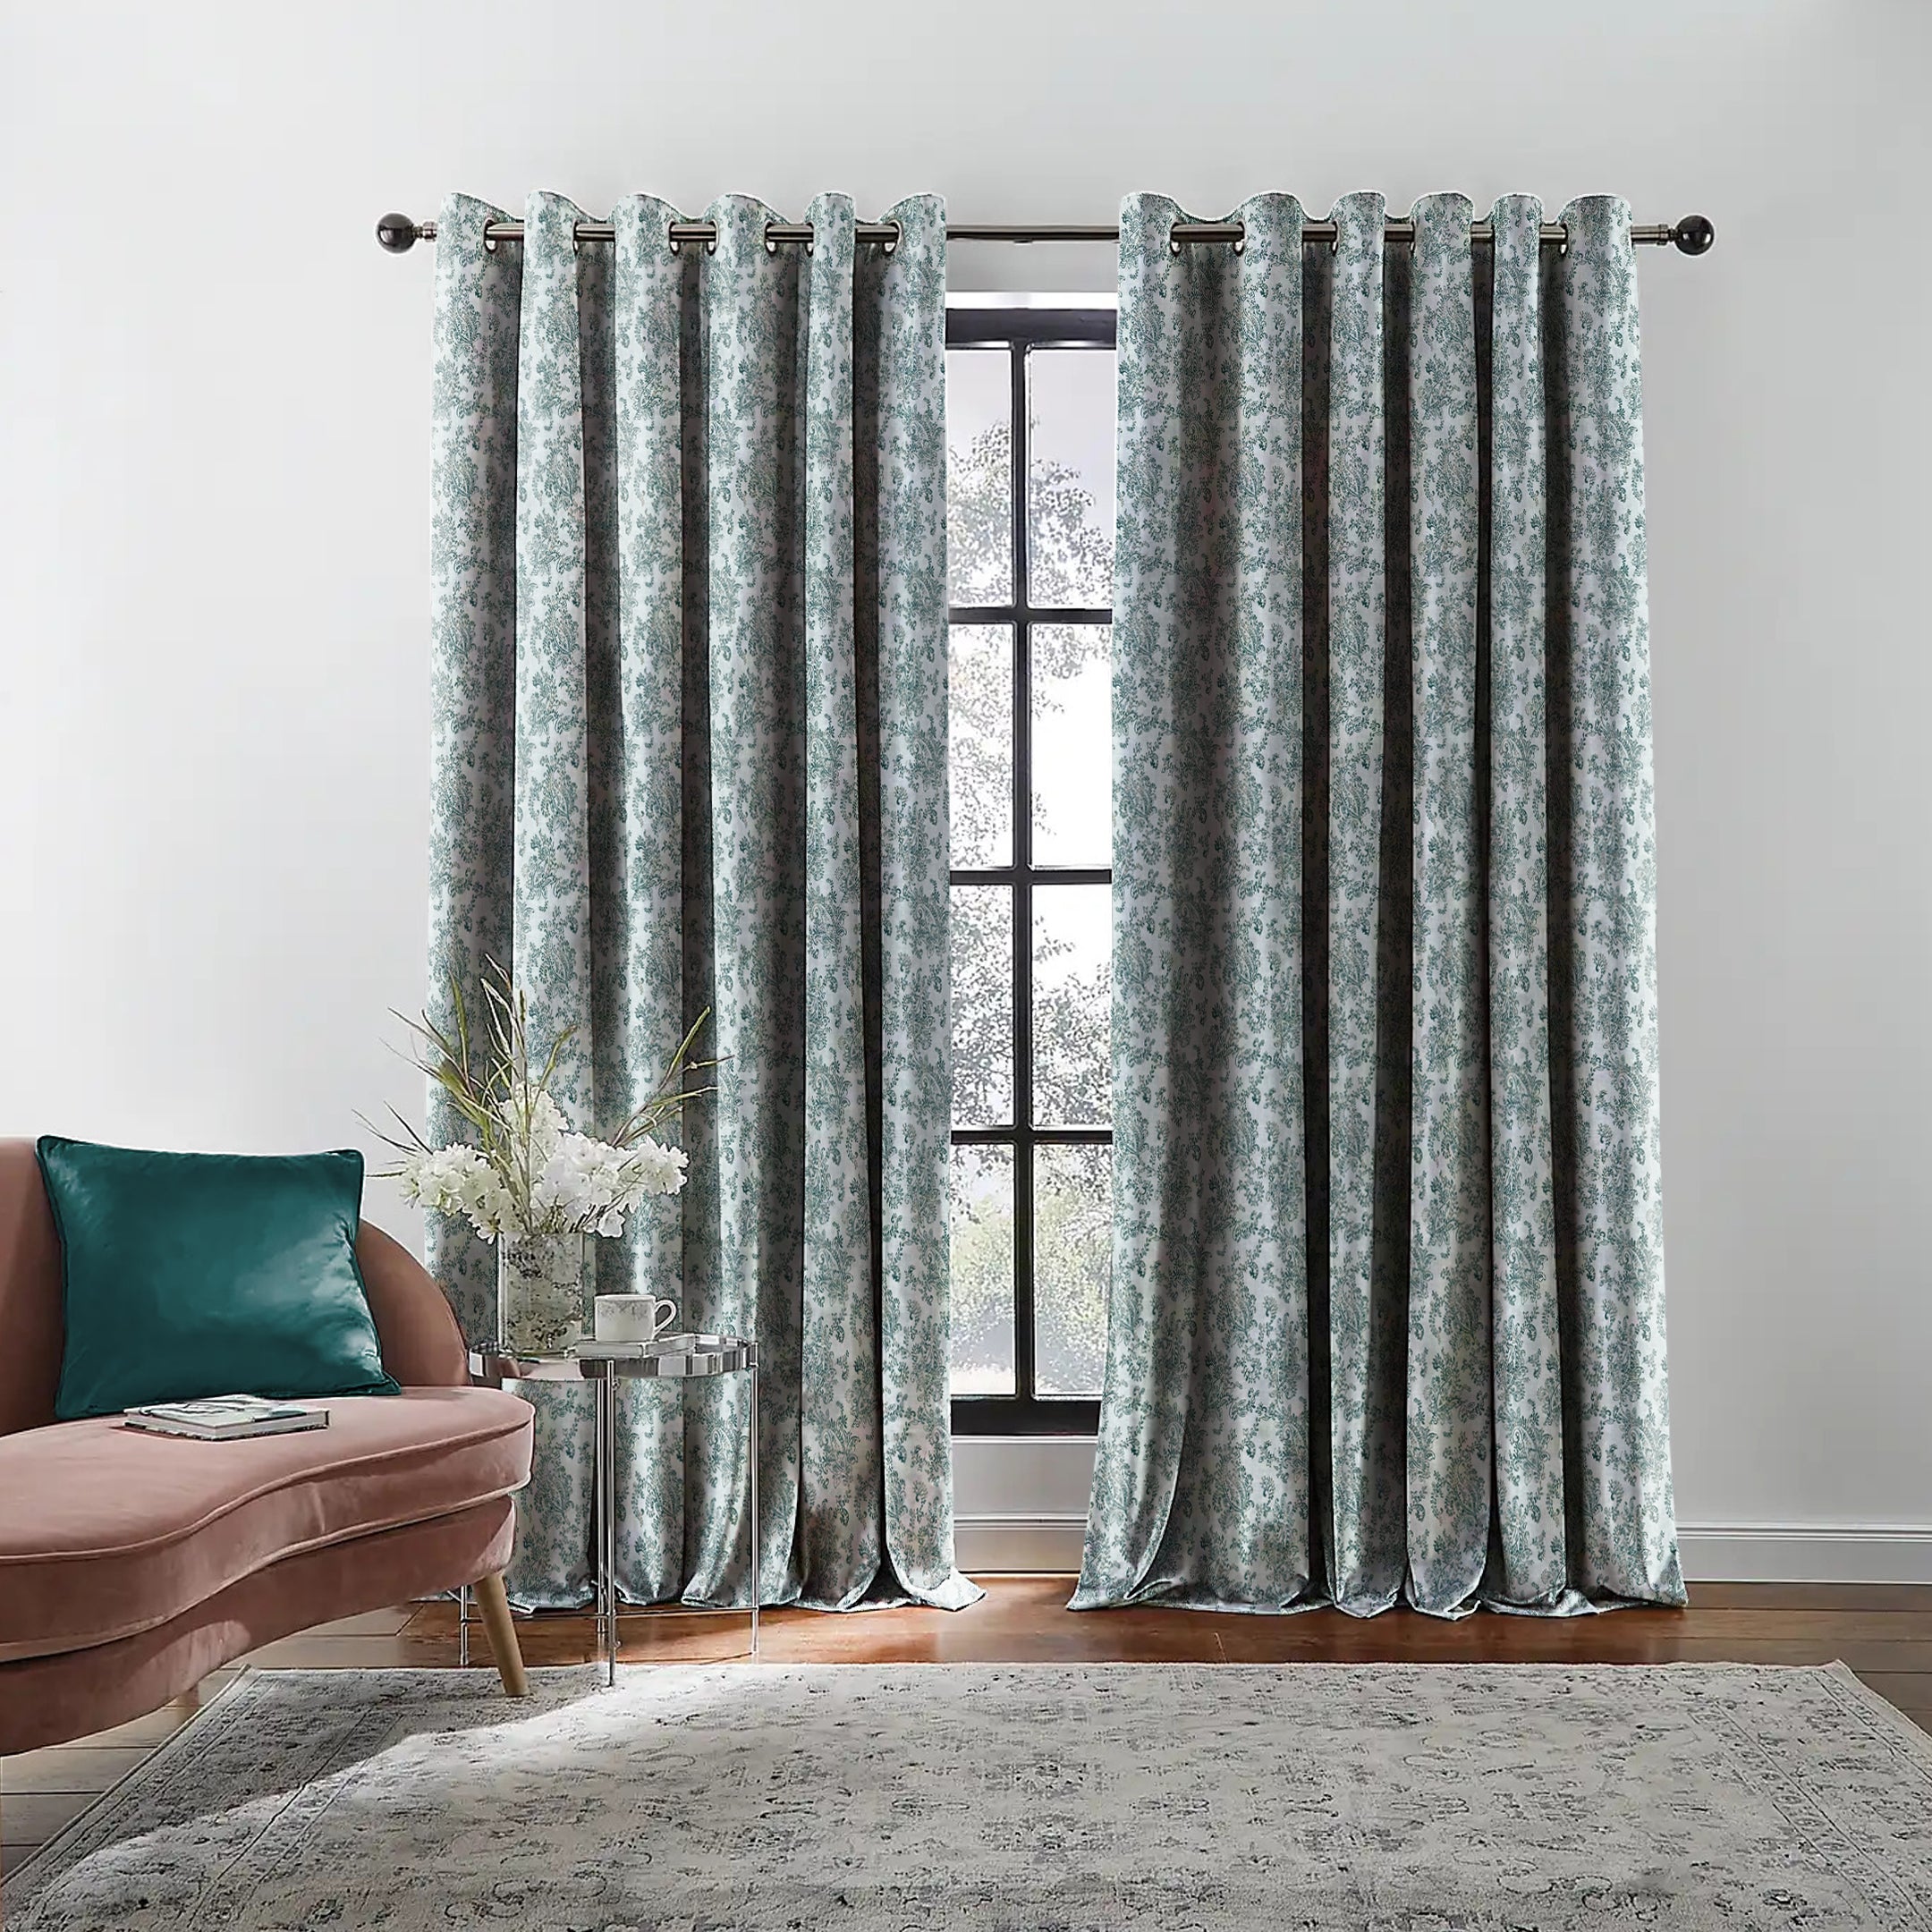 JODHPUR FLOWERS BLACKOUT CURTAIN WHITE AND TEAL